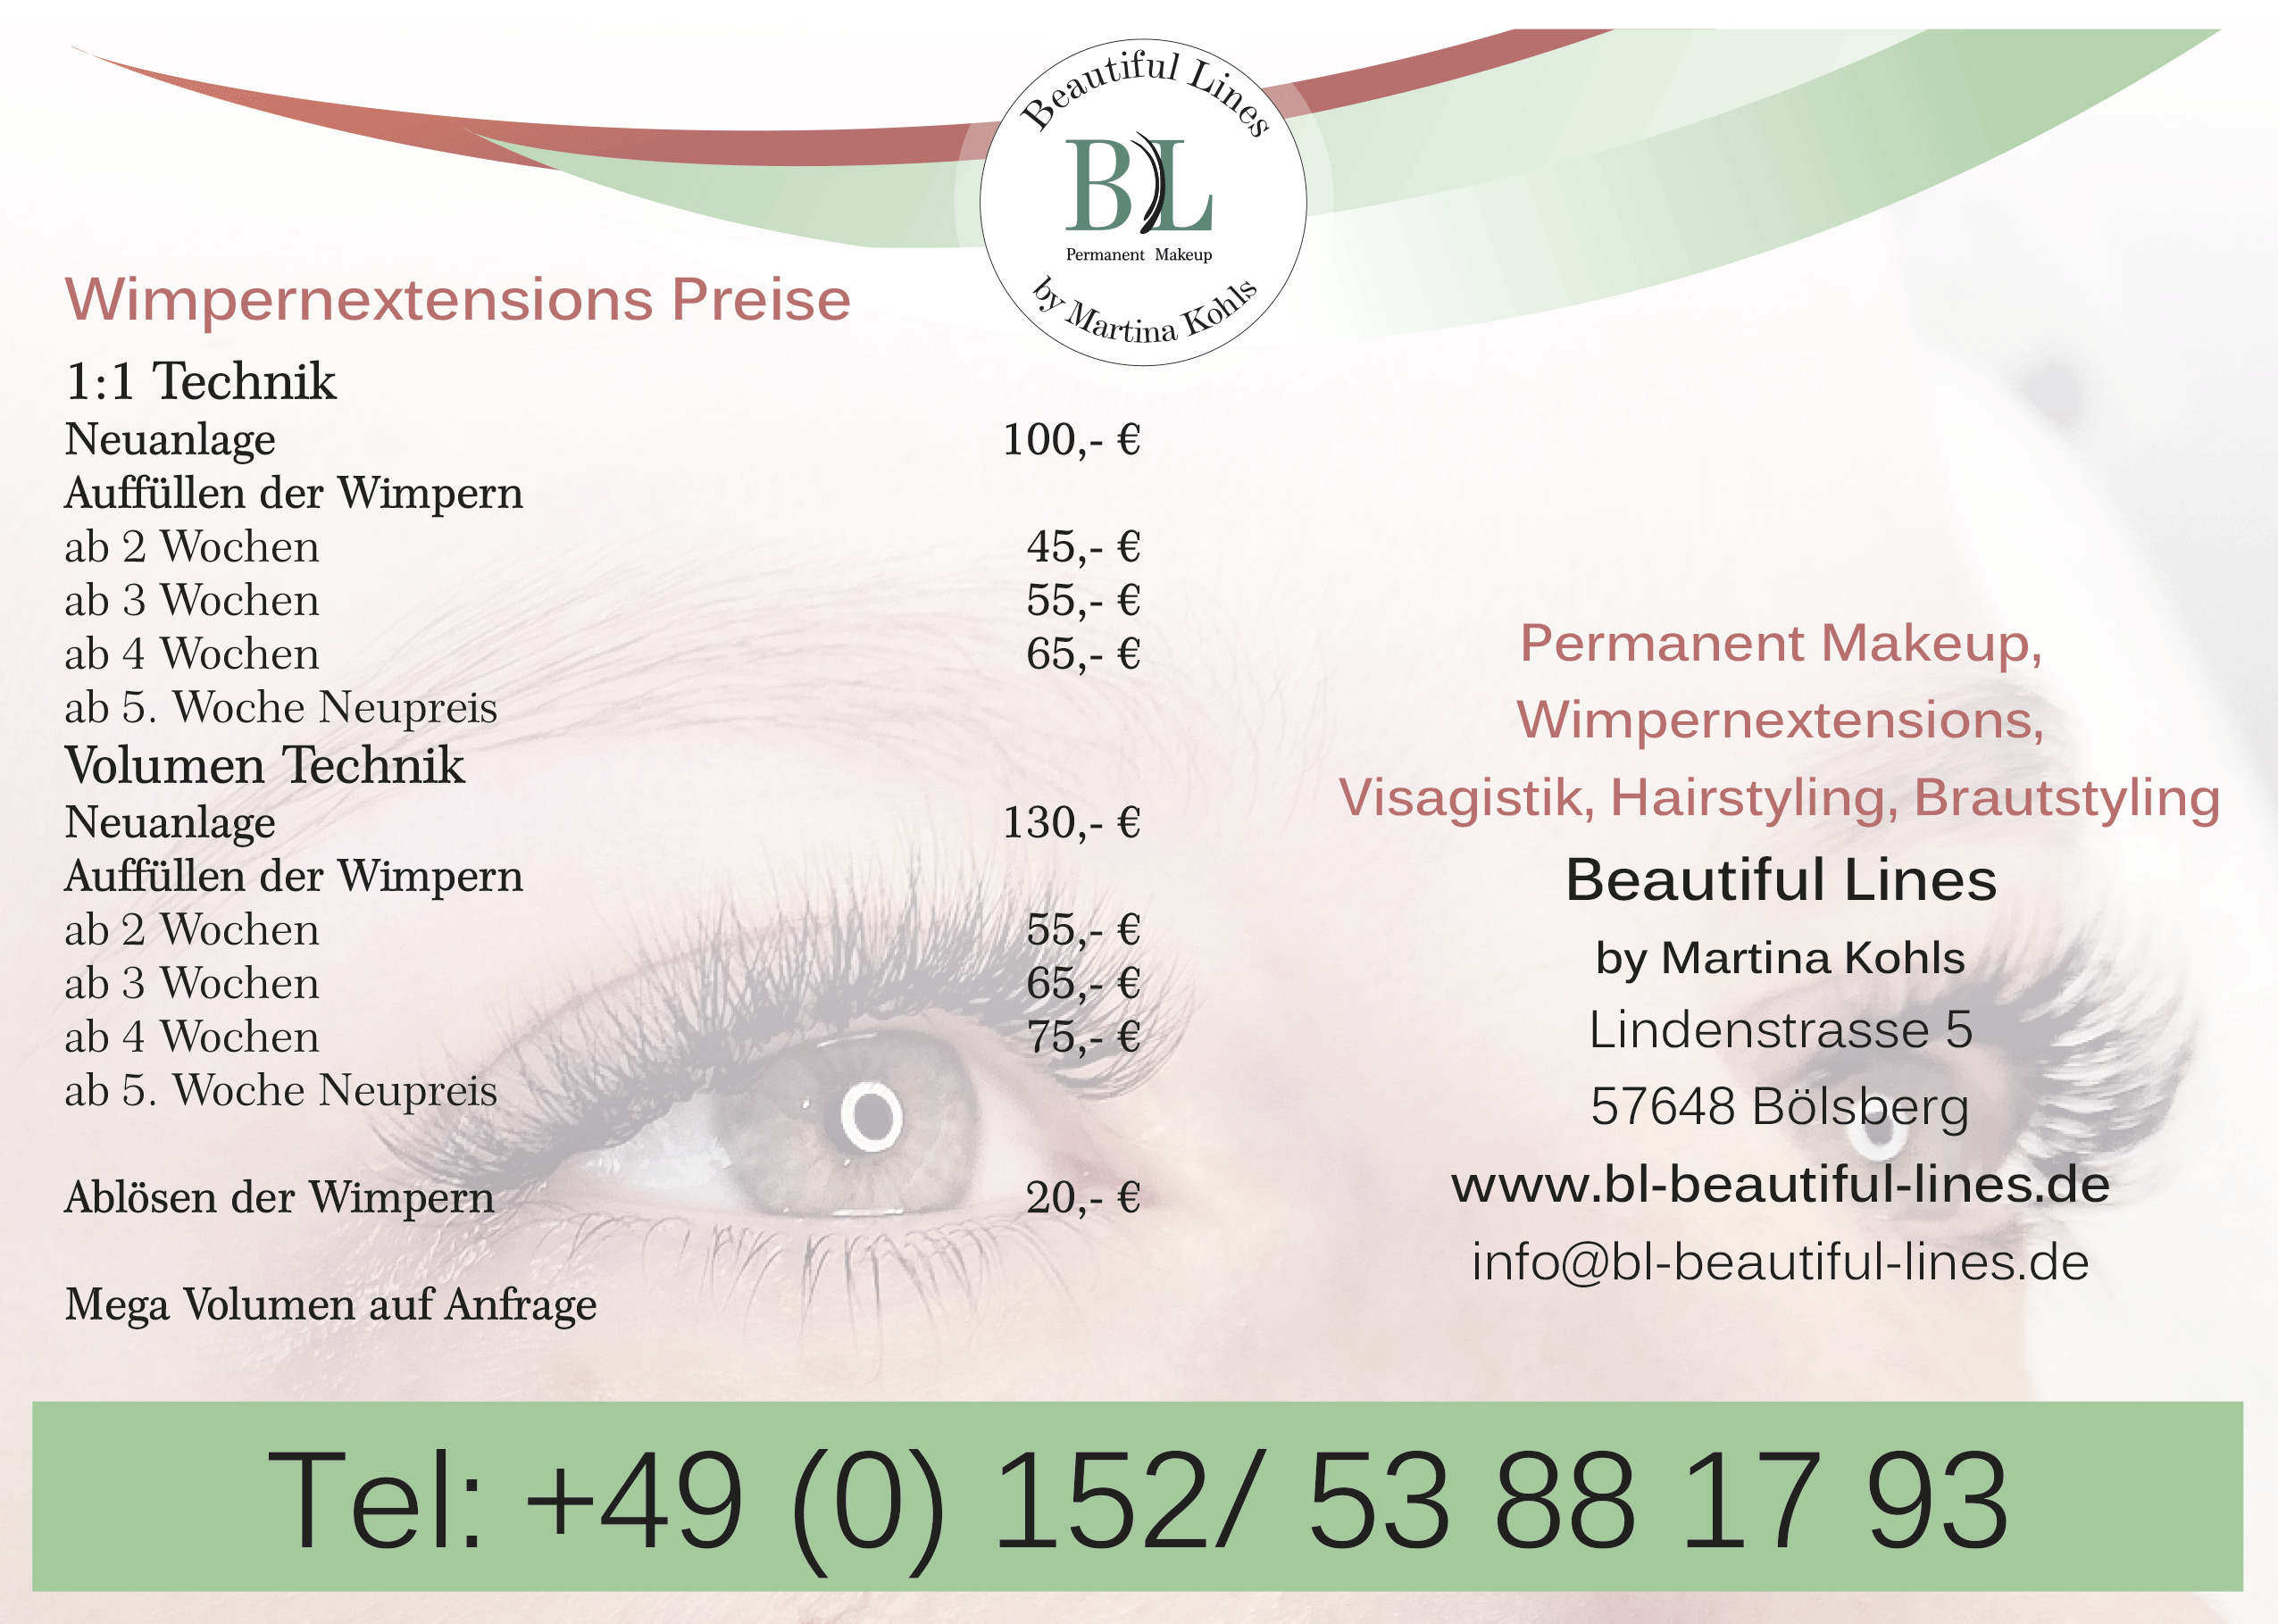 Preise Wimpernextensions